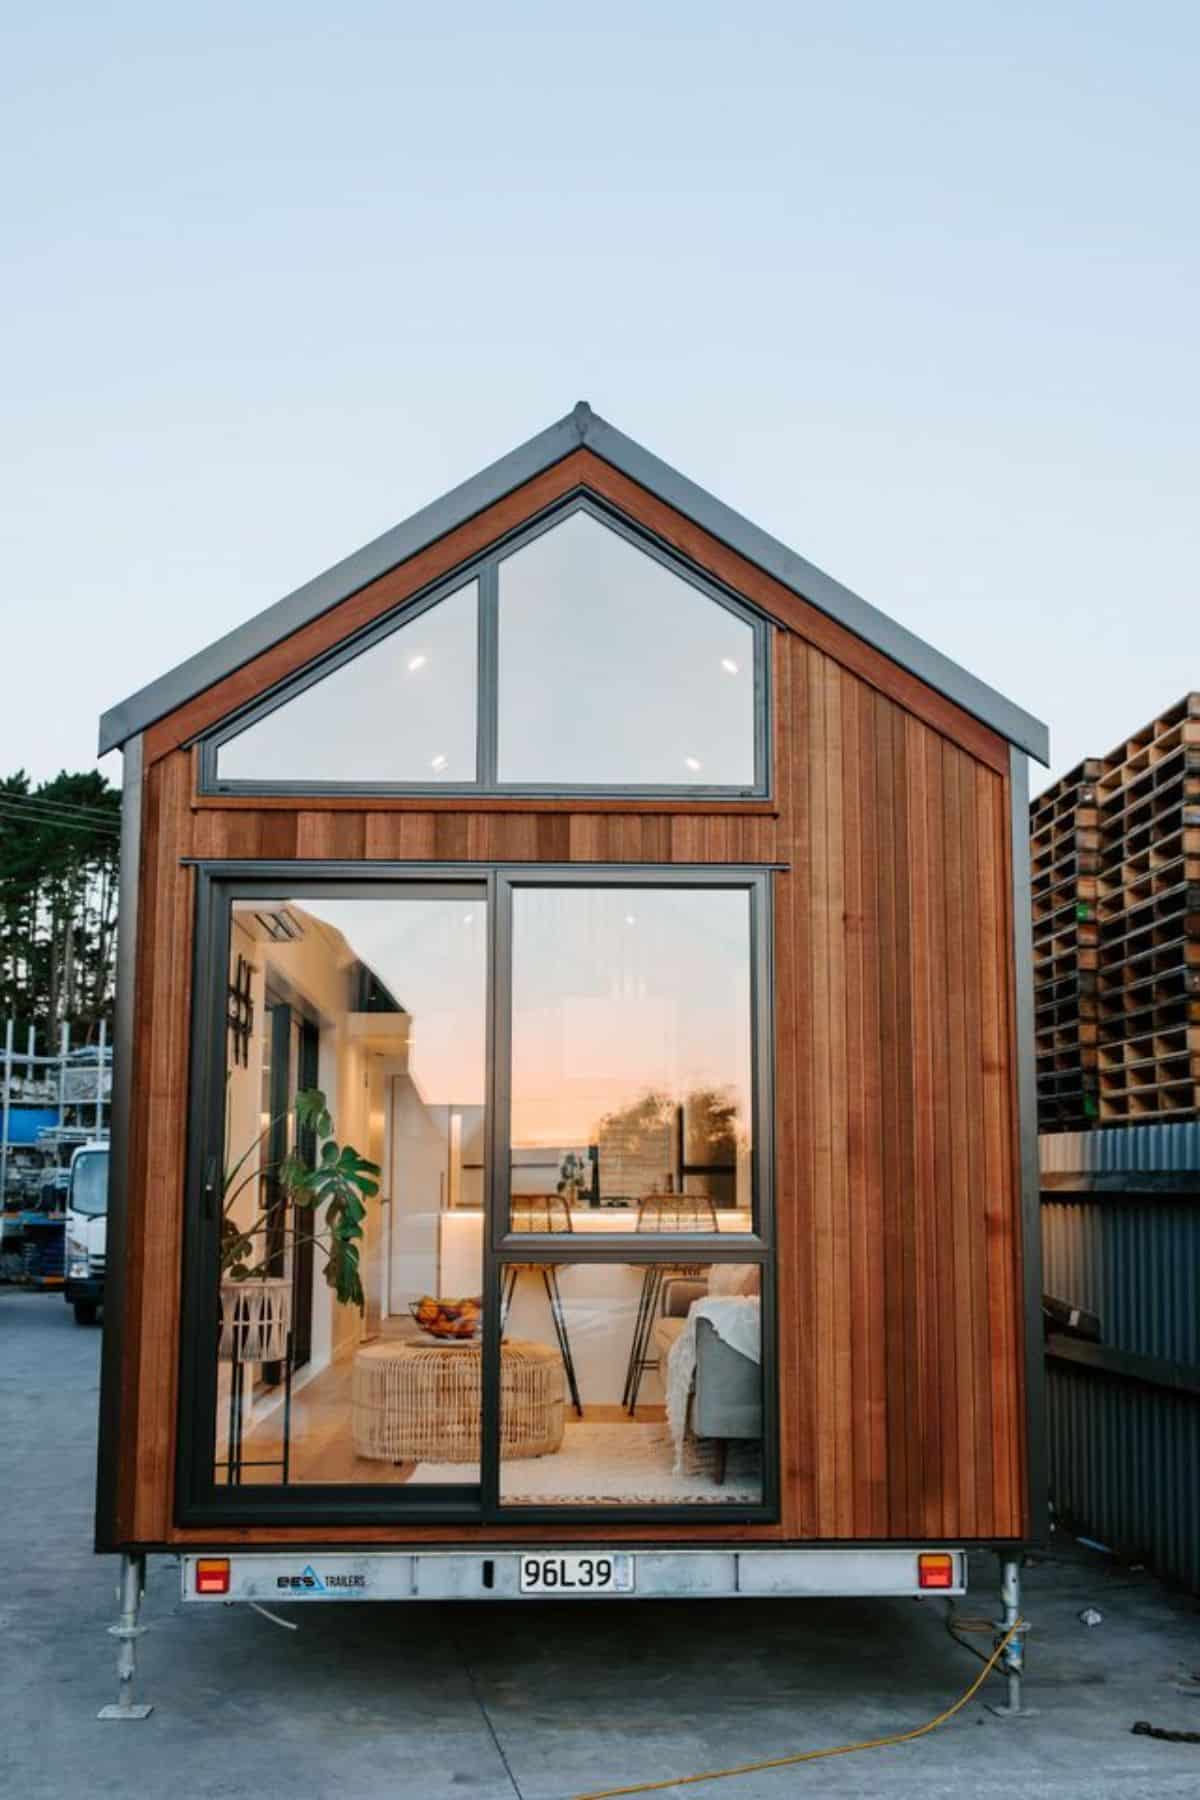 glass door view of 2 bedroom tiny house from outside